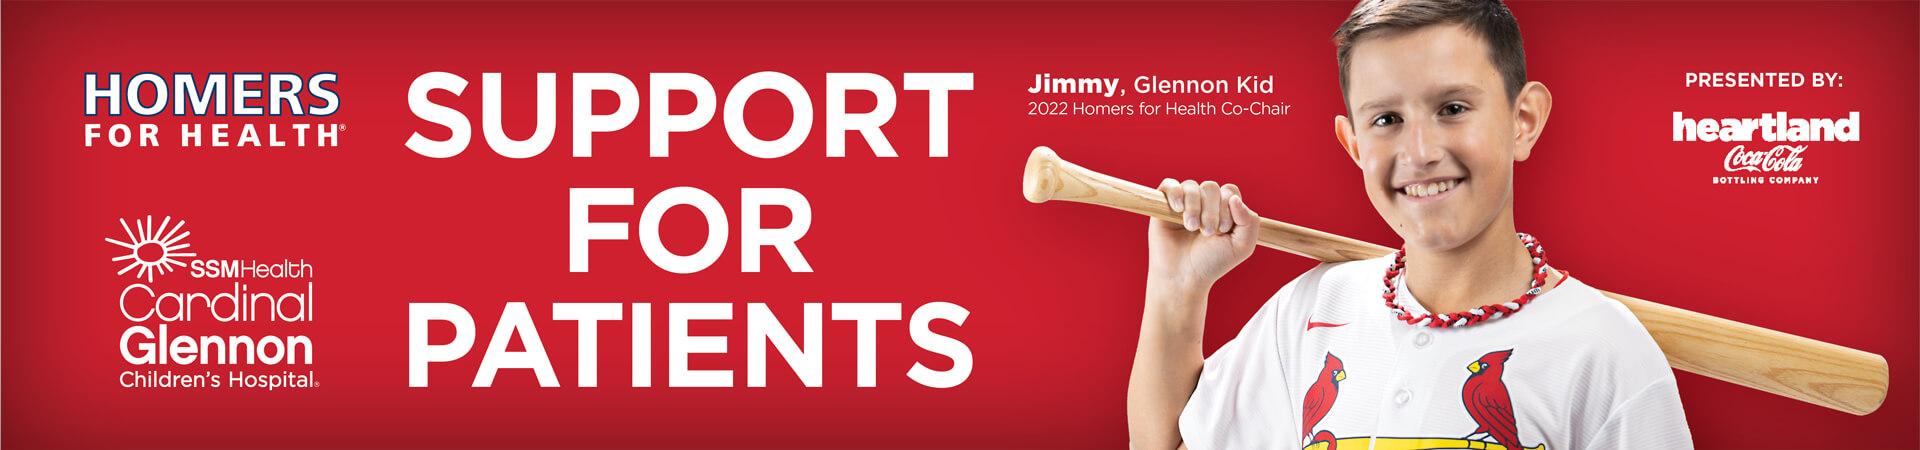 Support for Patients - Homers for Health patient co-chair, Jimmy